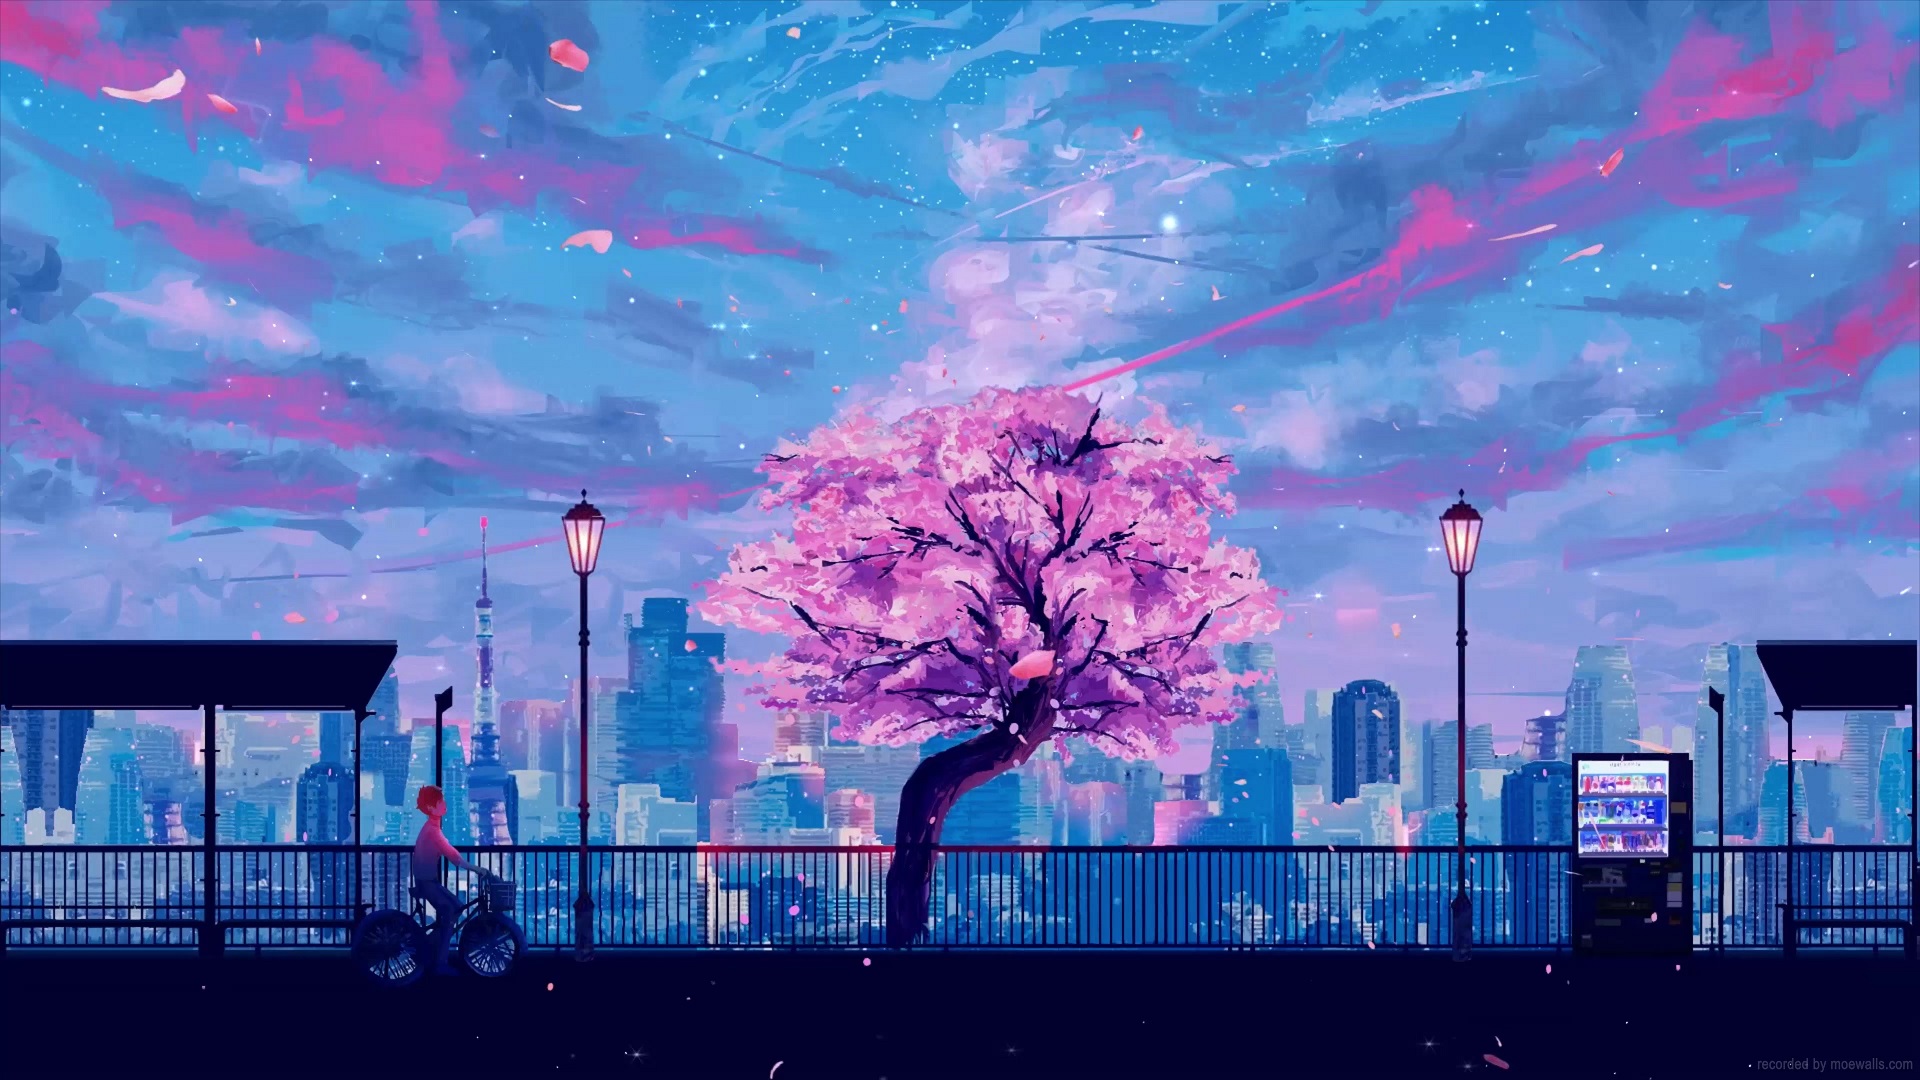 Anime Boy Riding Bicycle Cherry Blossom Road Live Wallpaper - MoeWalls